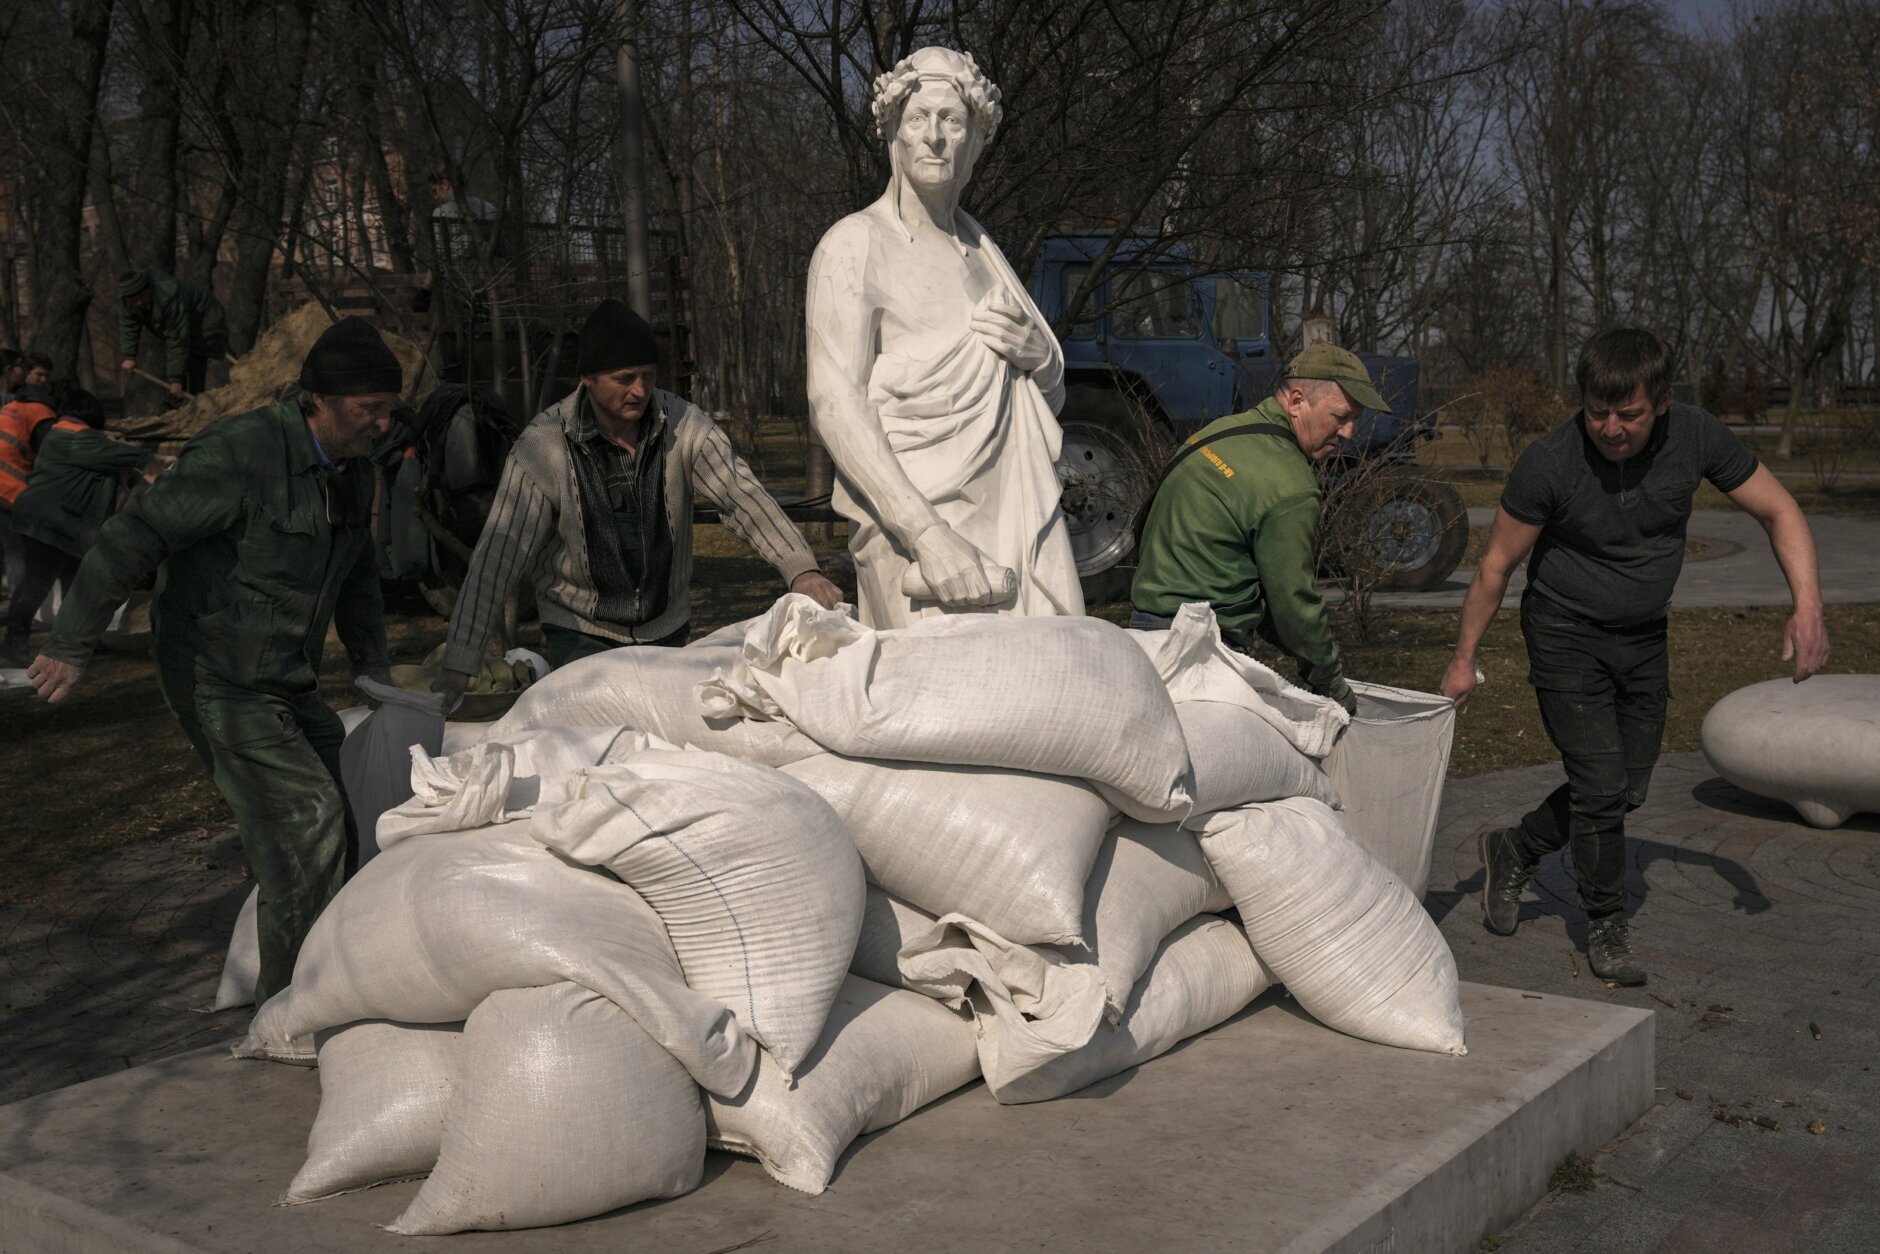 Municipal workers cover the statue of Italian poet and philosopher Dante Alighieri with sandbags to protect it from potential damage from shelling, in Kyiv, Ukraine, Wednesday, March 23, 2022. The statue, by sculptor Luciano Massari, was inaugurated in 2015 to mark 750 years since Dante's birth. (AP Photo/Vadim Ghirda)